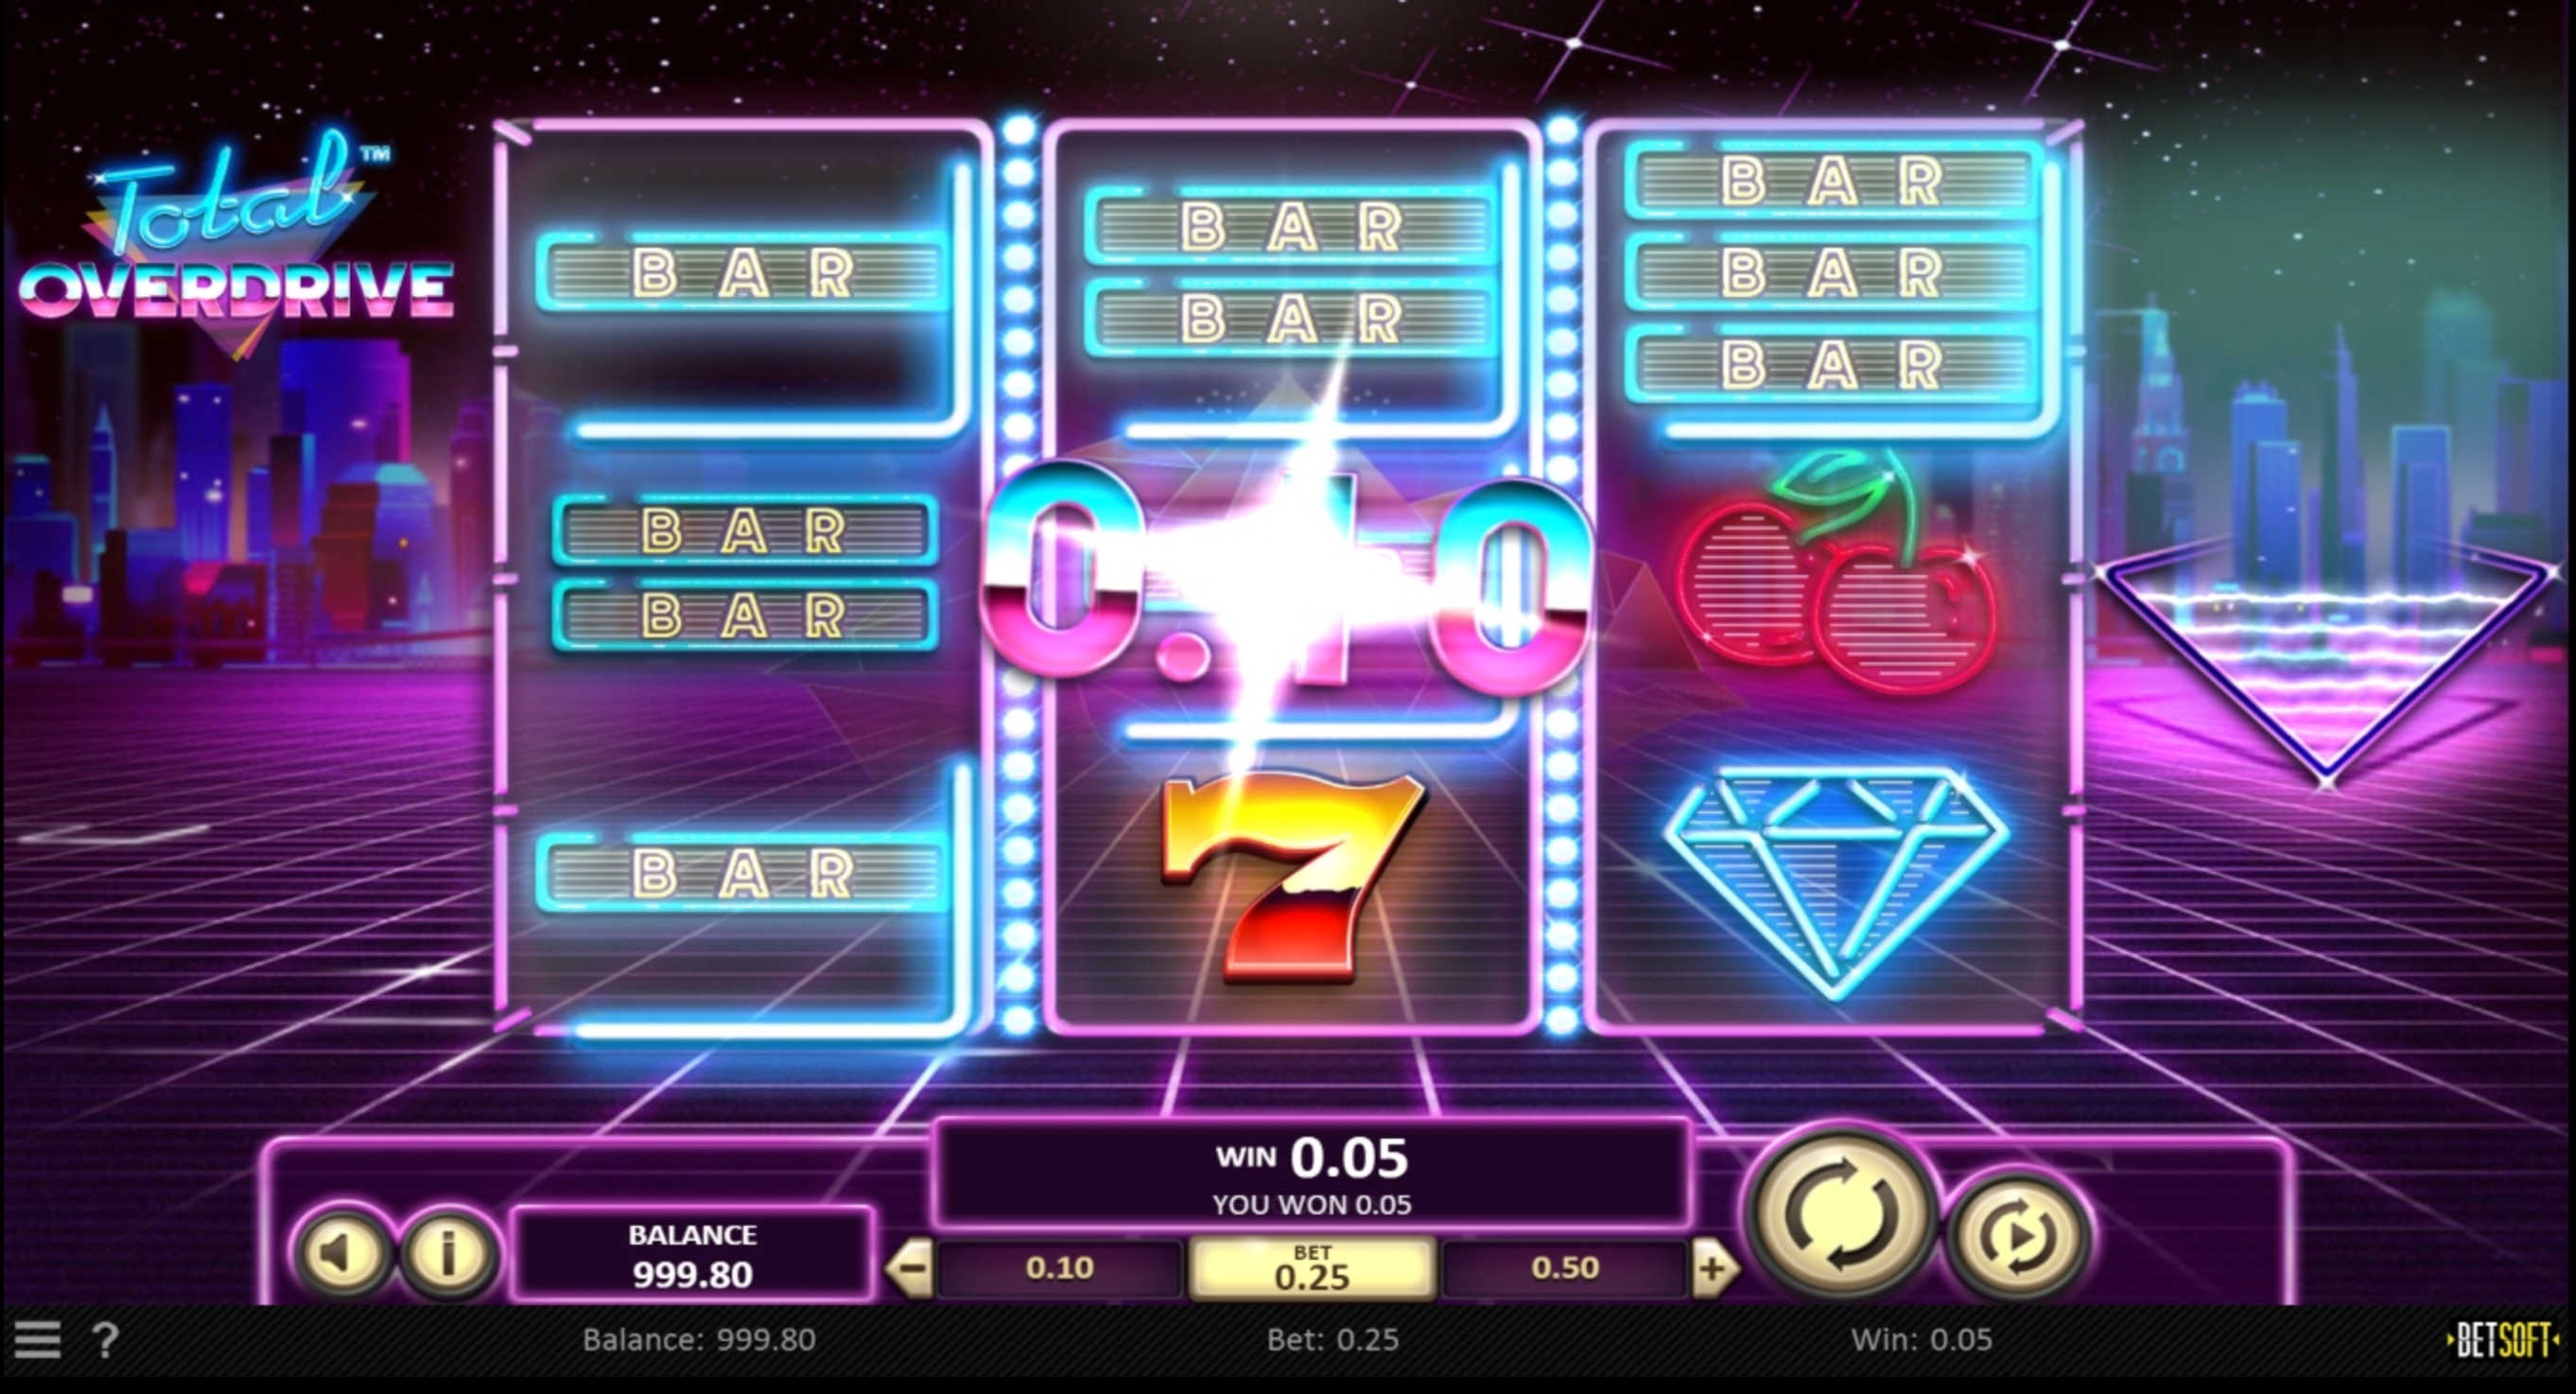 Win Money in Total Overdrive Free Slot Game by Betsoft